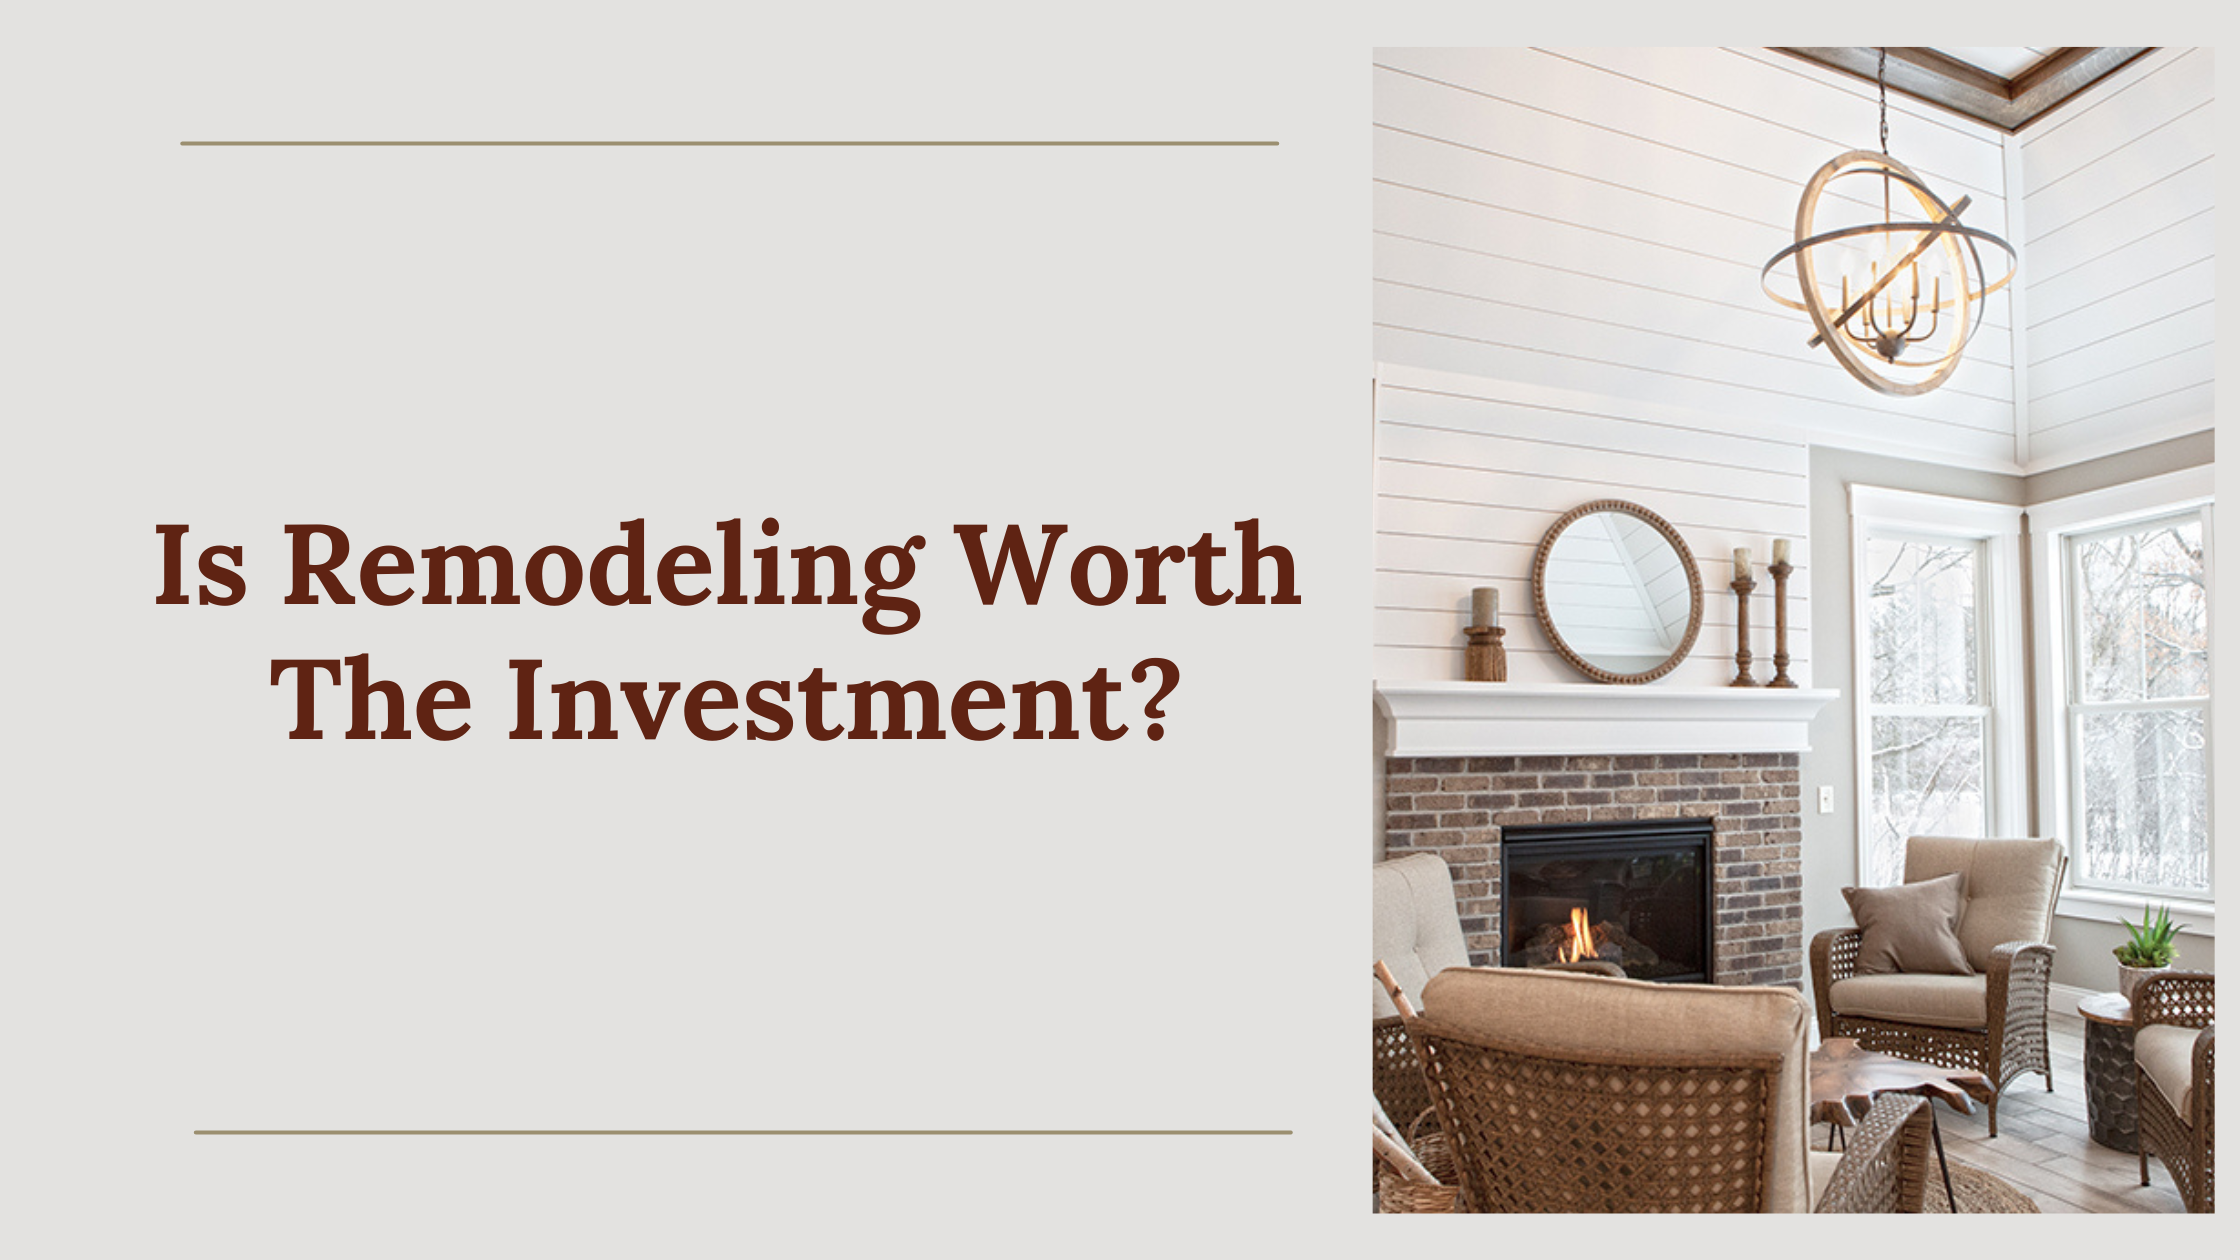 Is Remodeling Worth the Investment?